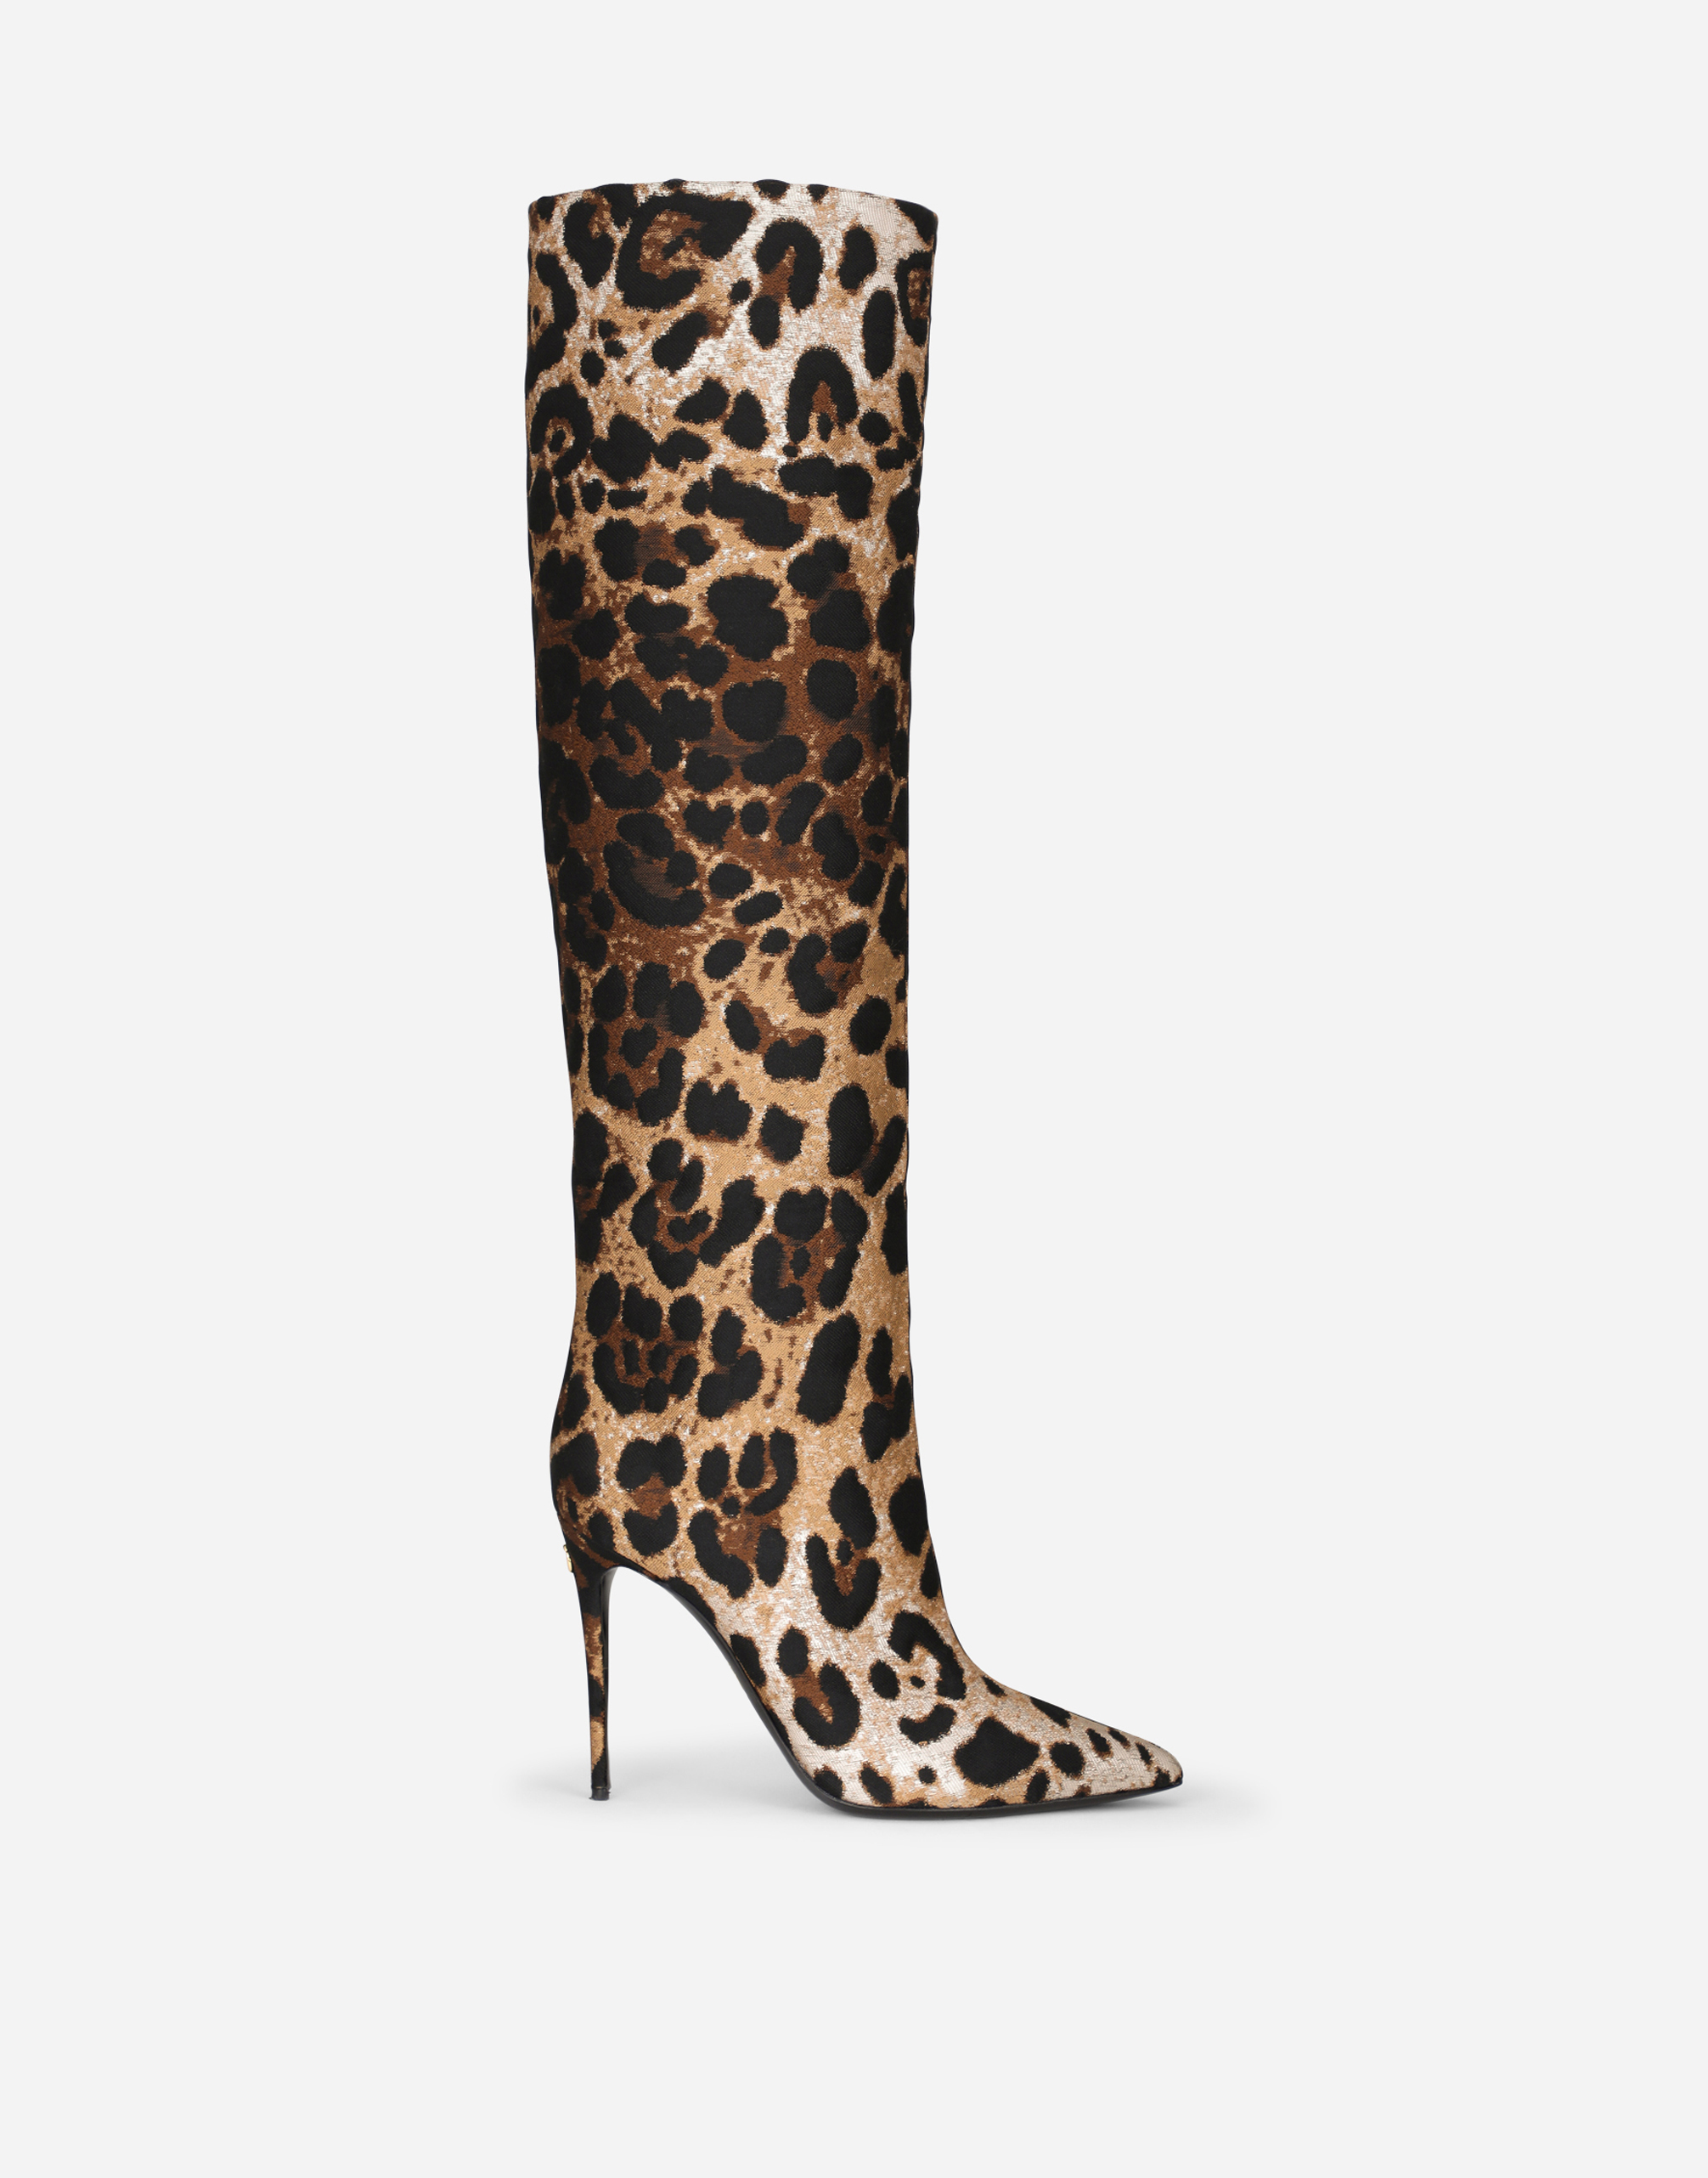 Leopard jacquard boots in Animal Print